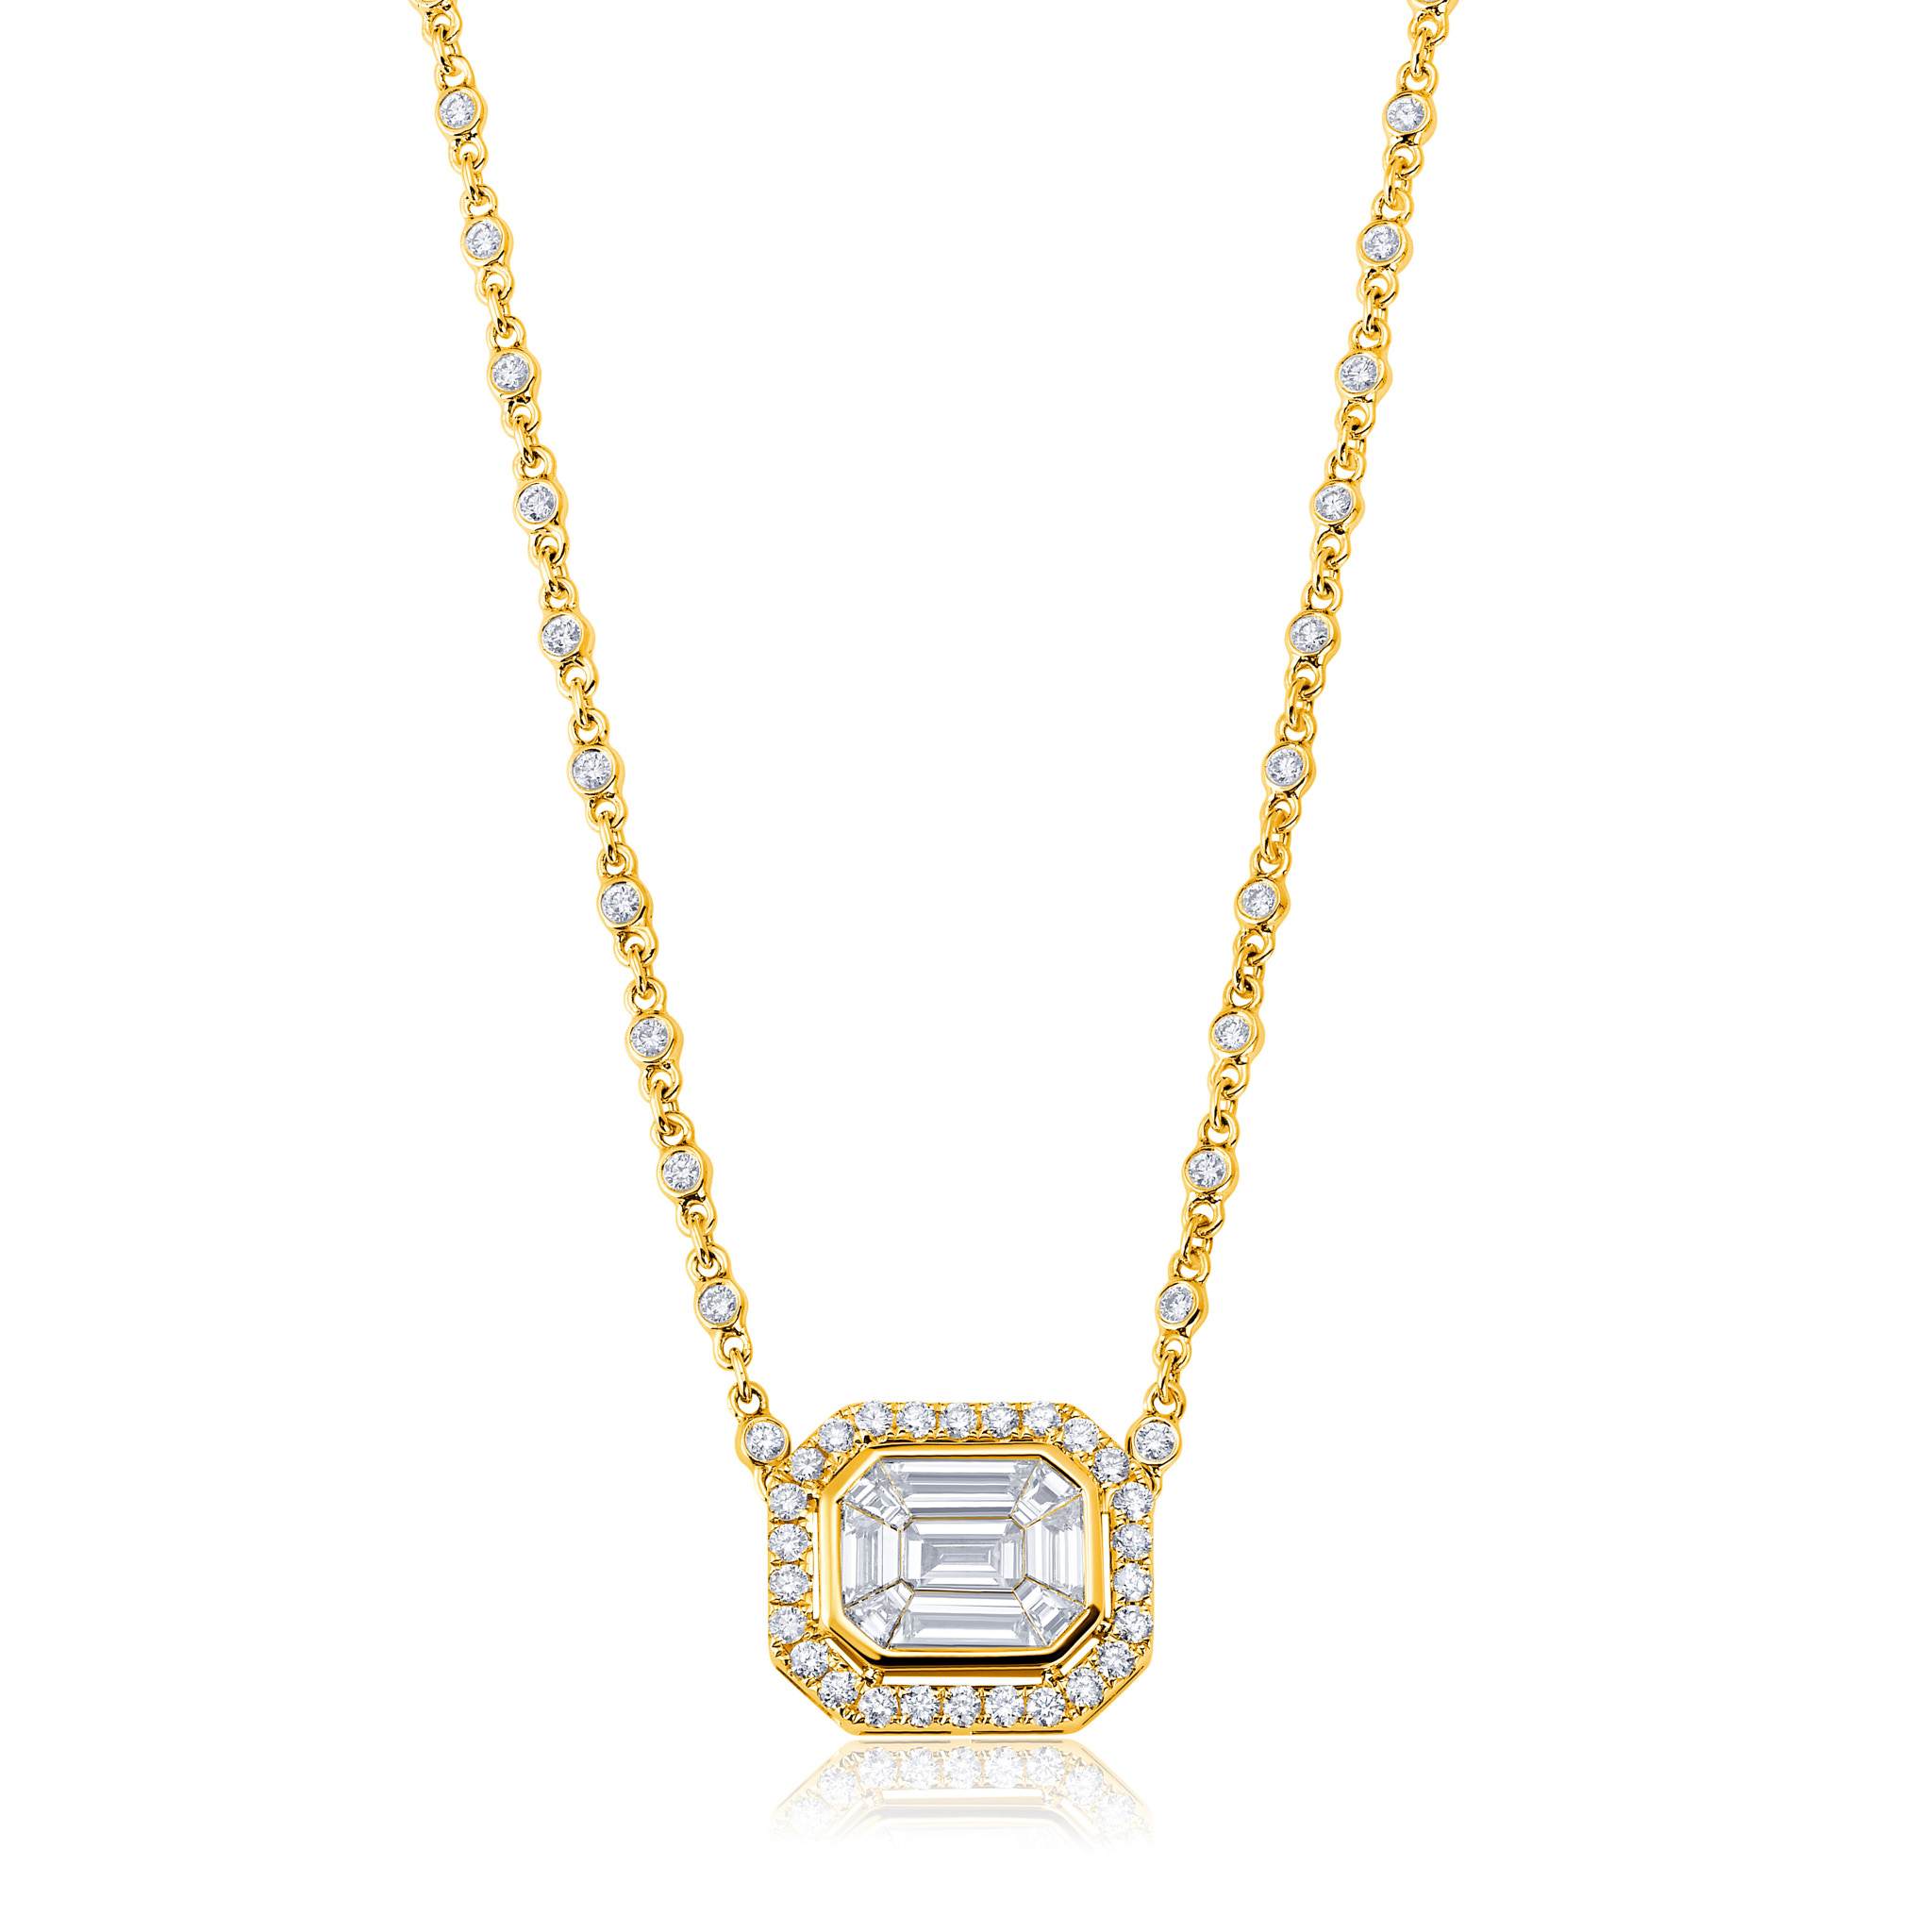 Graziela Gems - Necklace - Grand Ascension Necklace - Yellow Gold